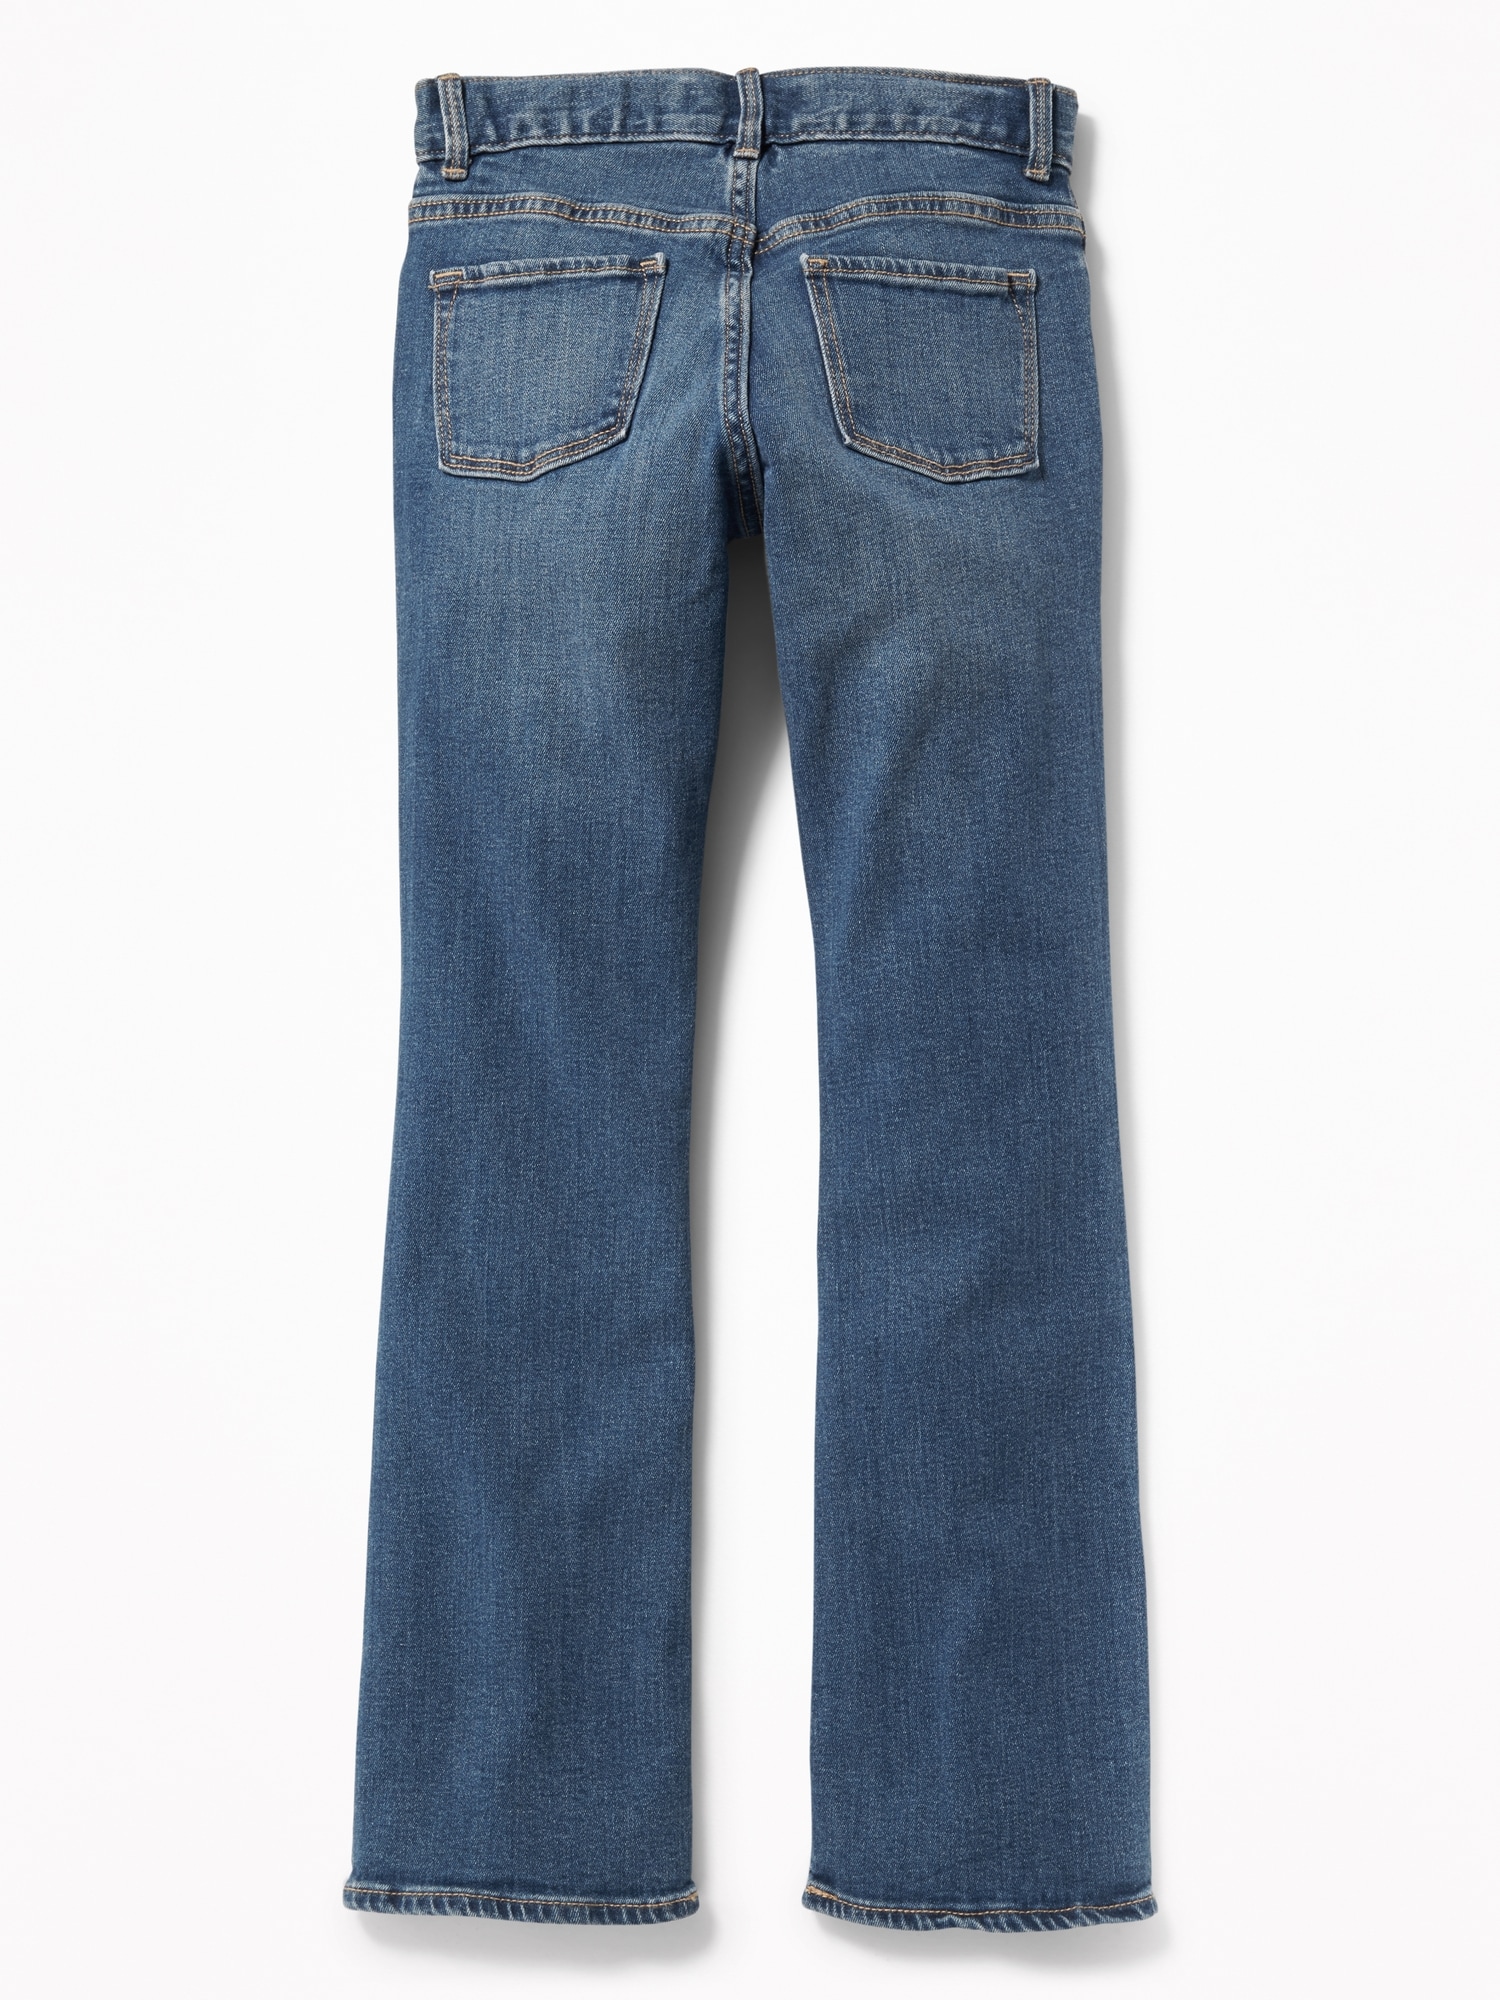 Medium-Wash Boot-Cut Jeans for Girls | Old Navy